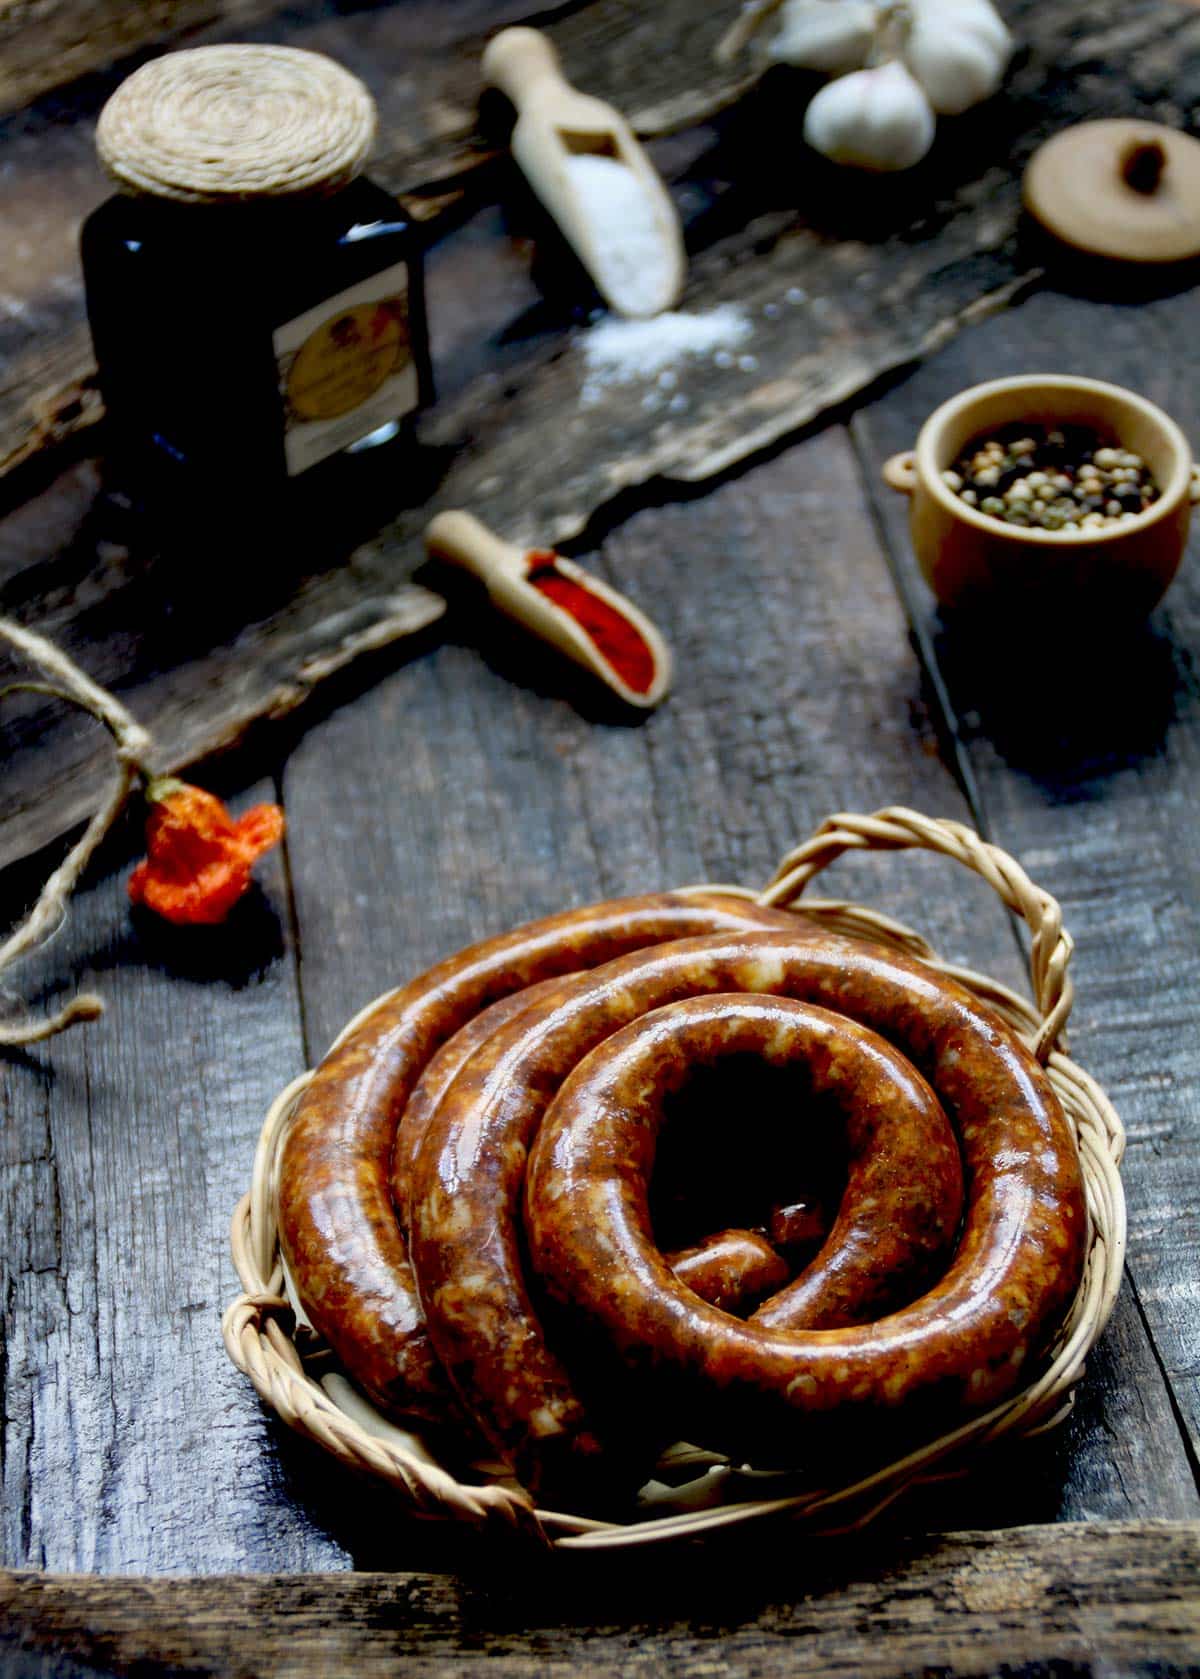 A coil of venison sausage on a table. 